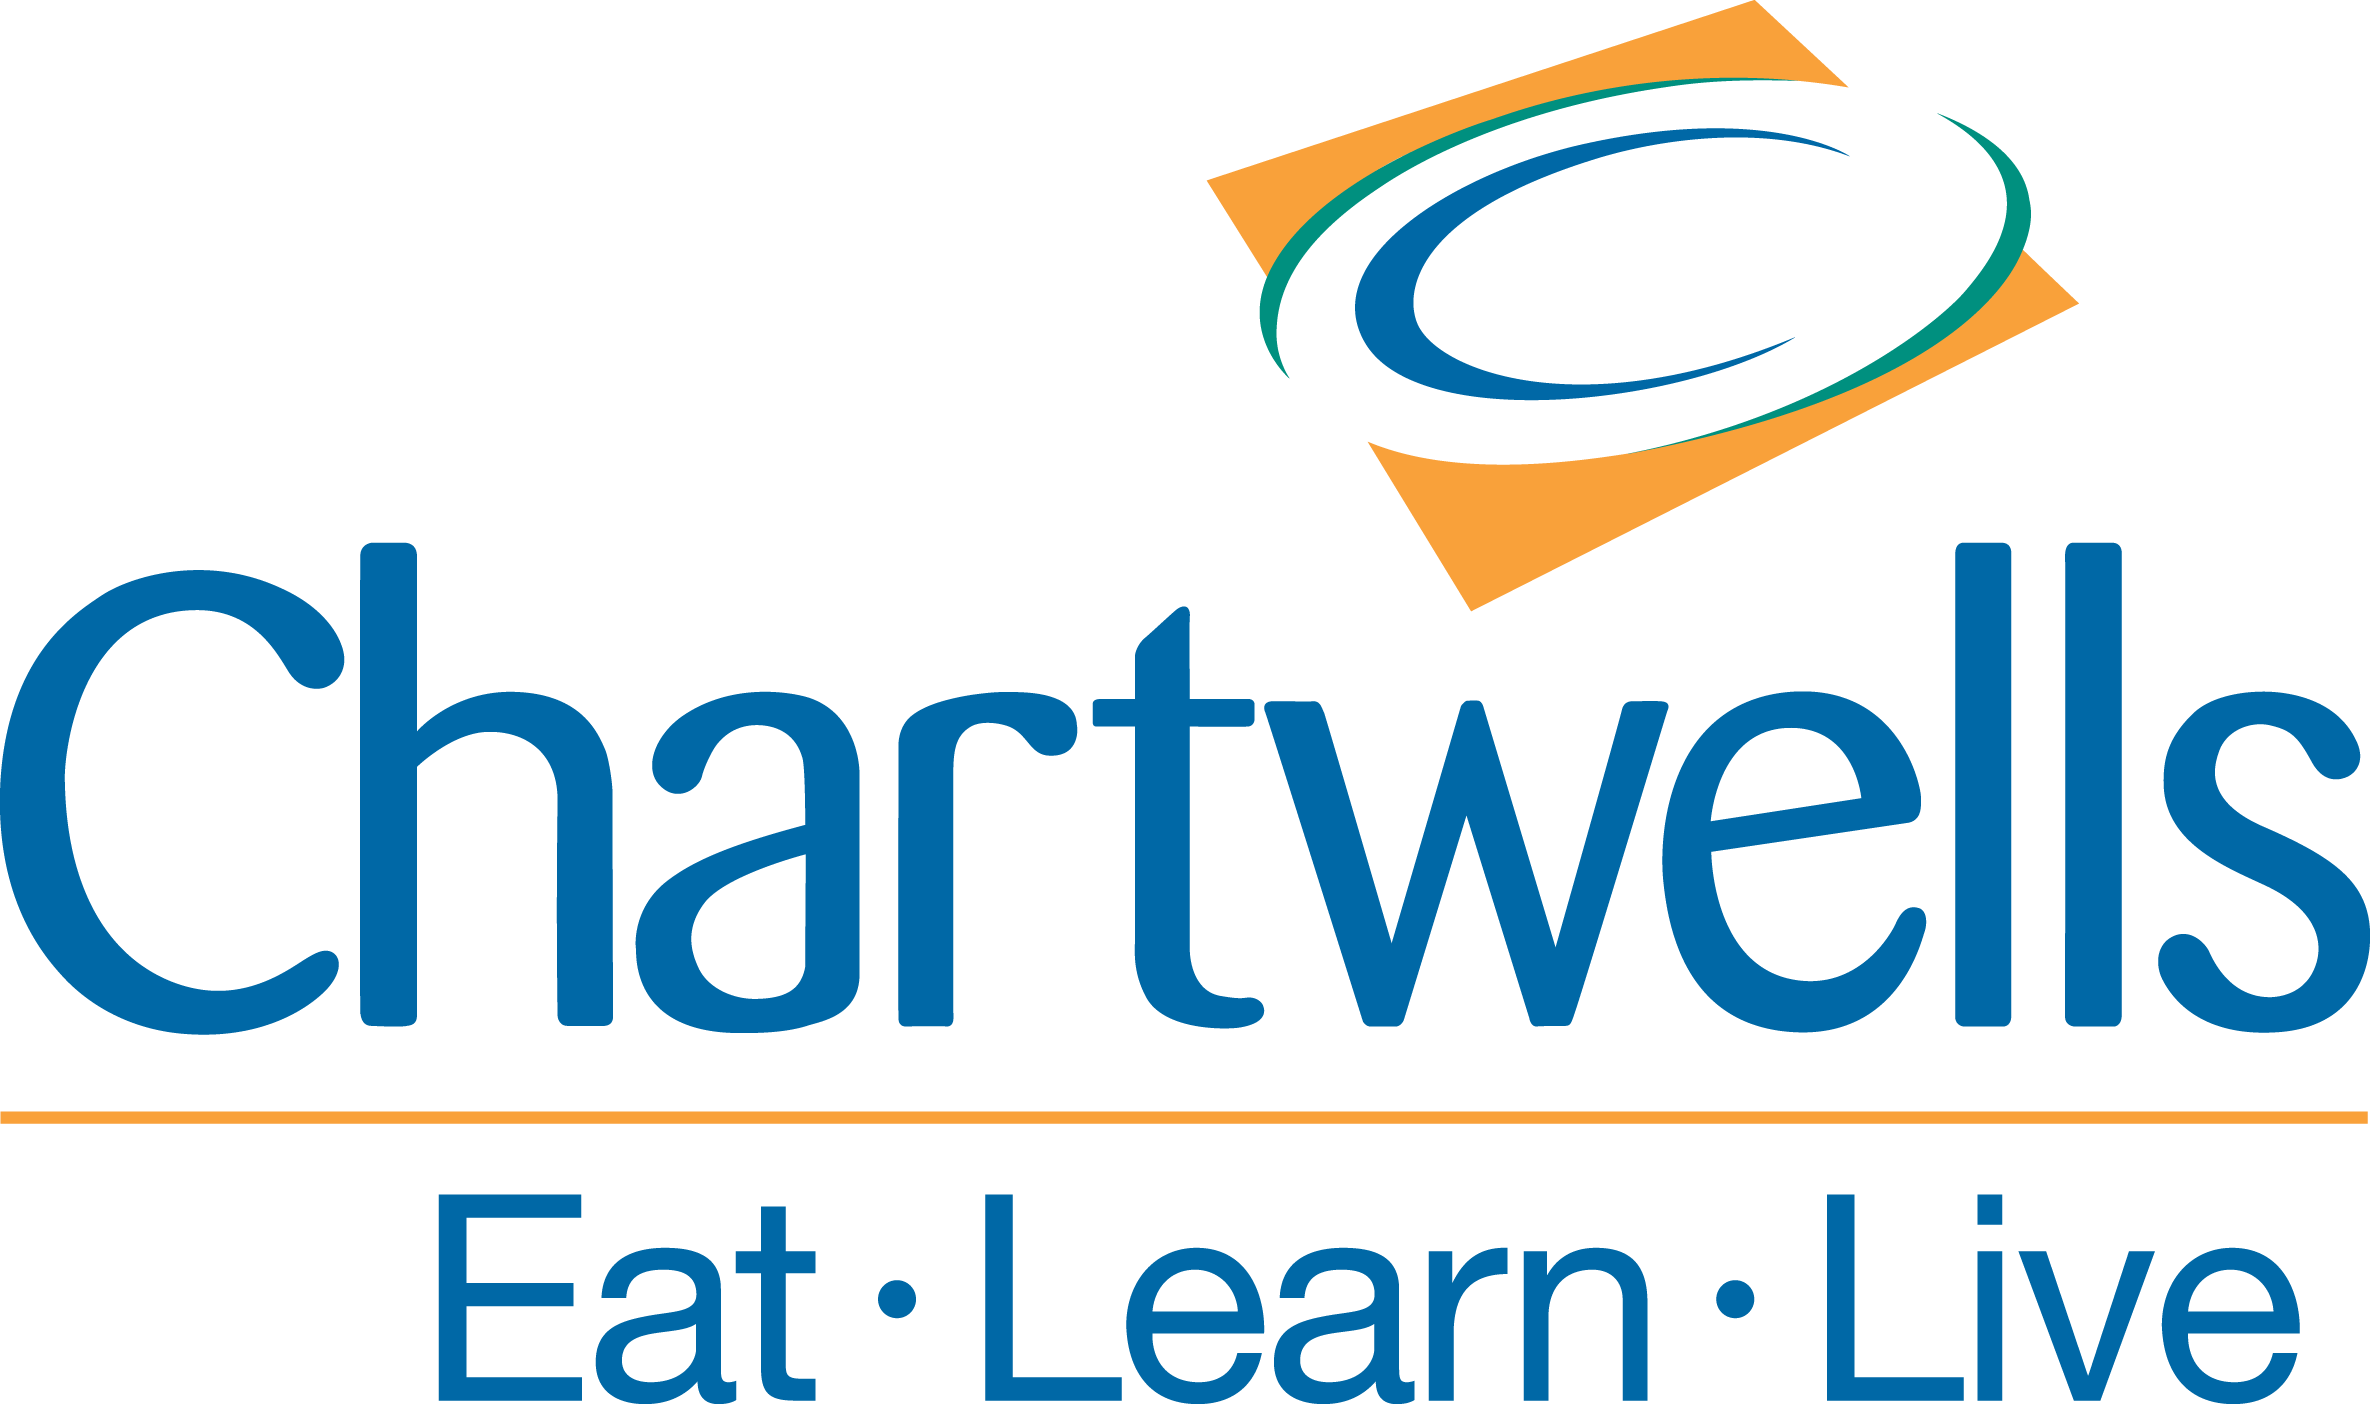 Chartwells Higher Education Dinning Services - Chartwells Food Service (2370x1404)